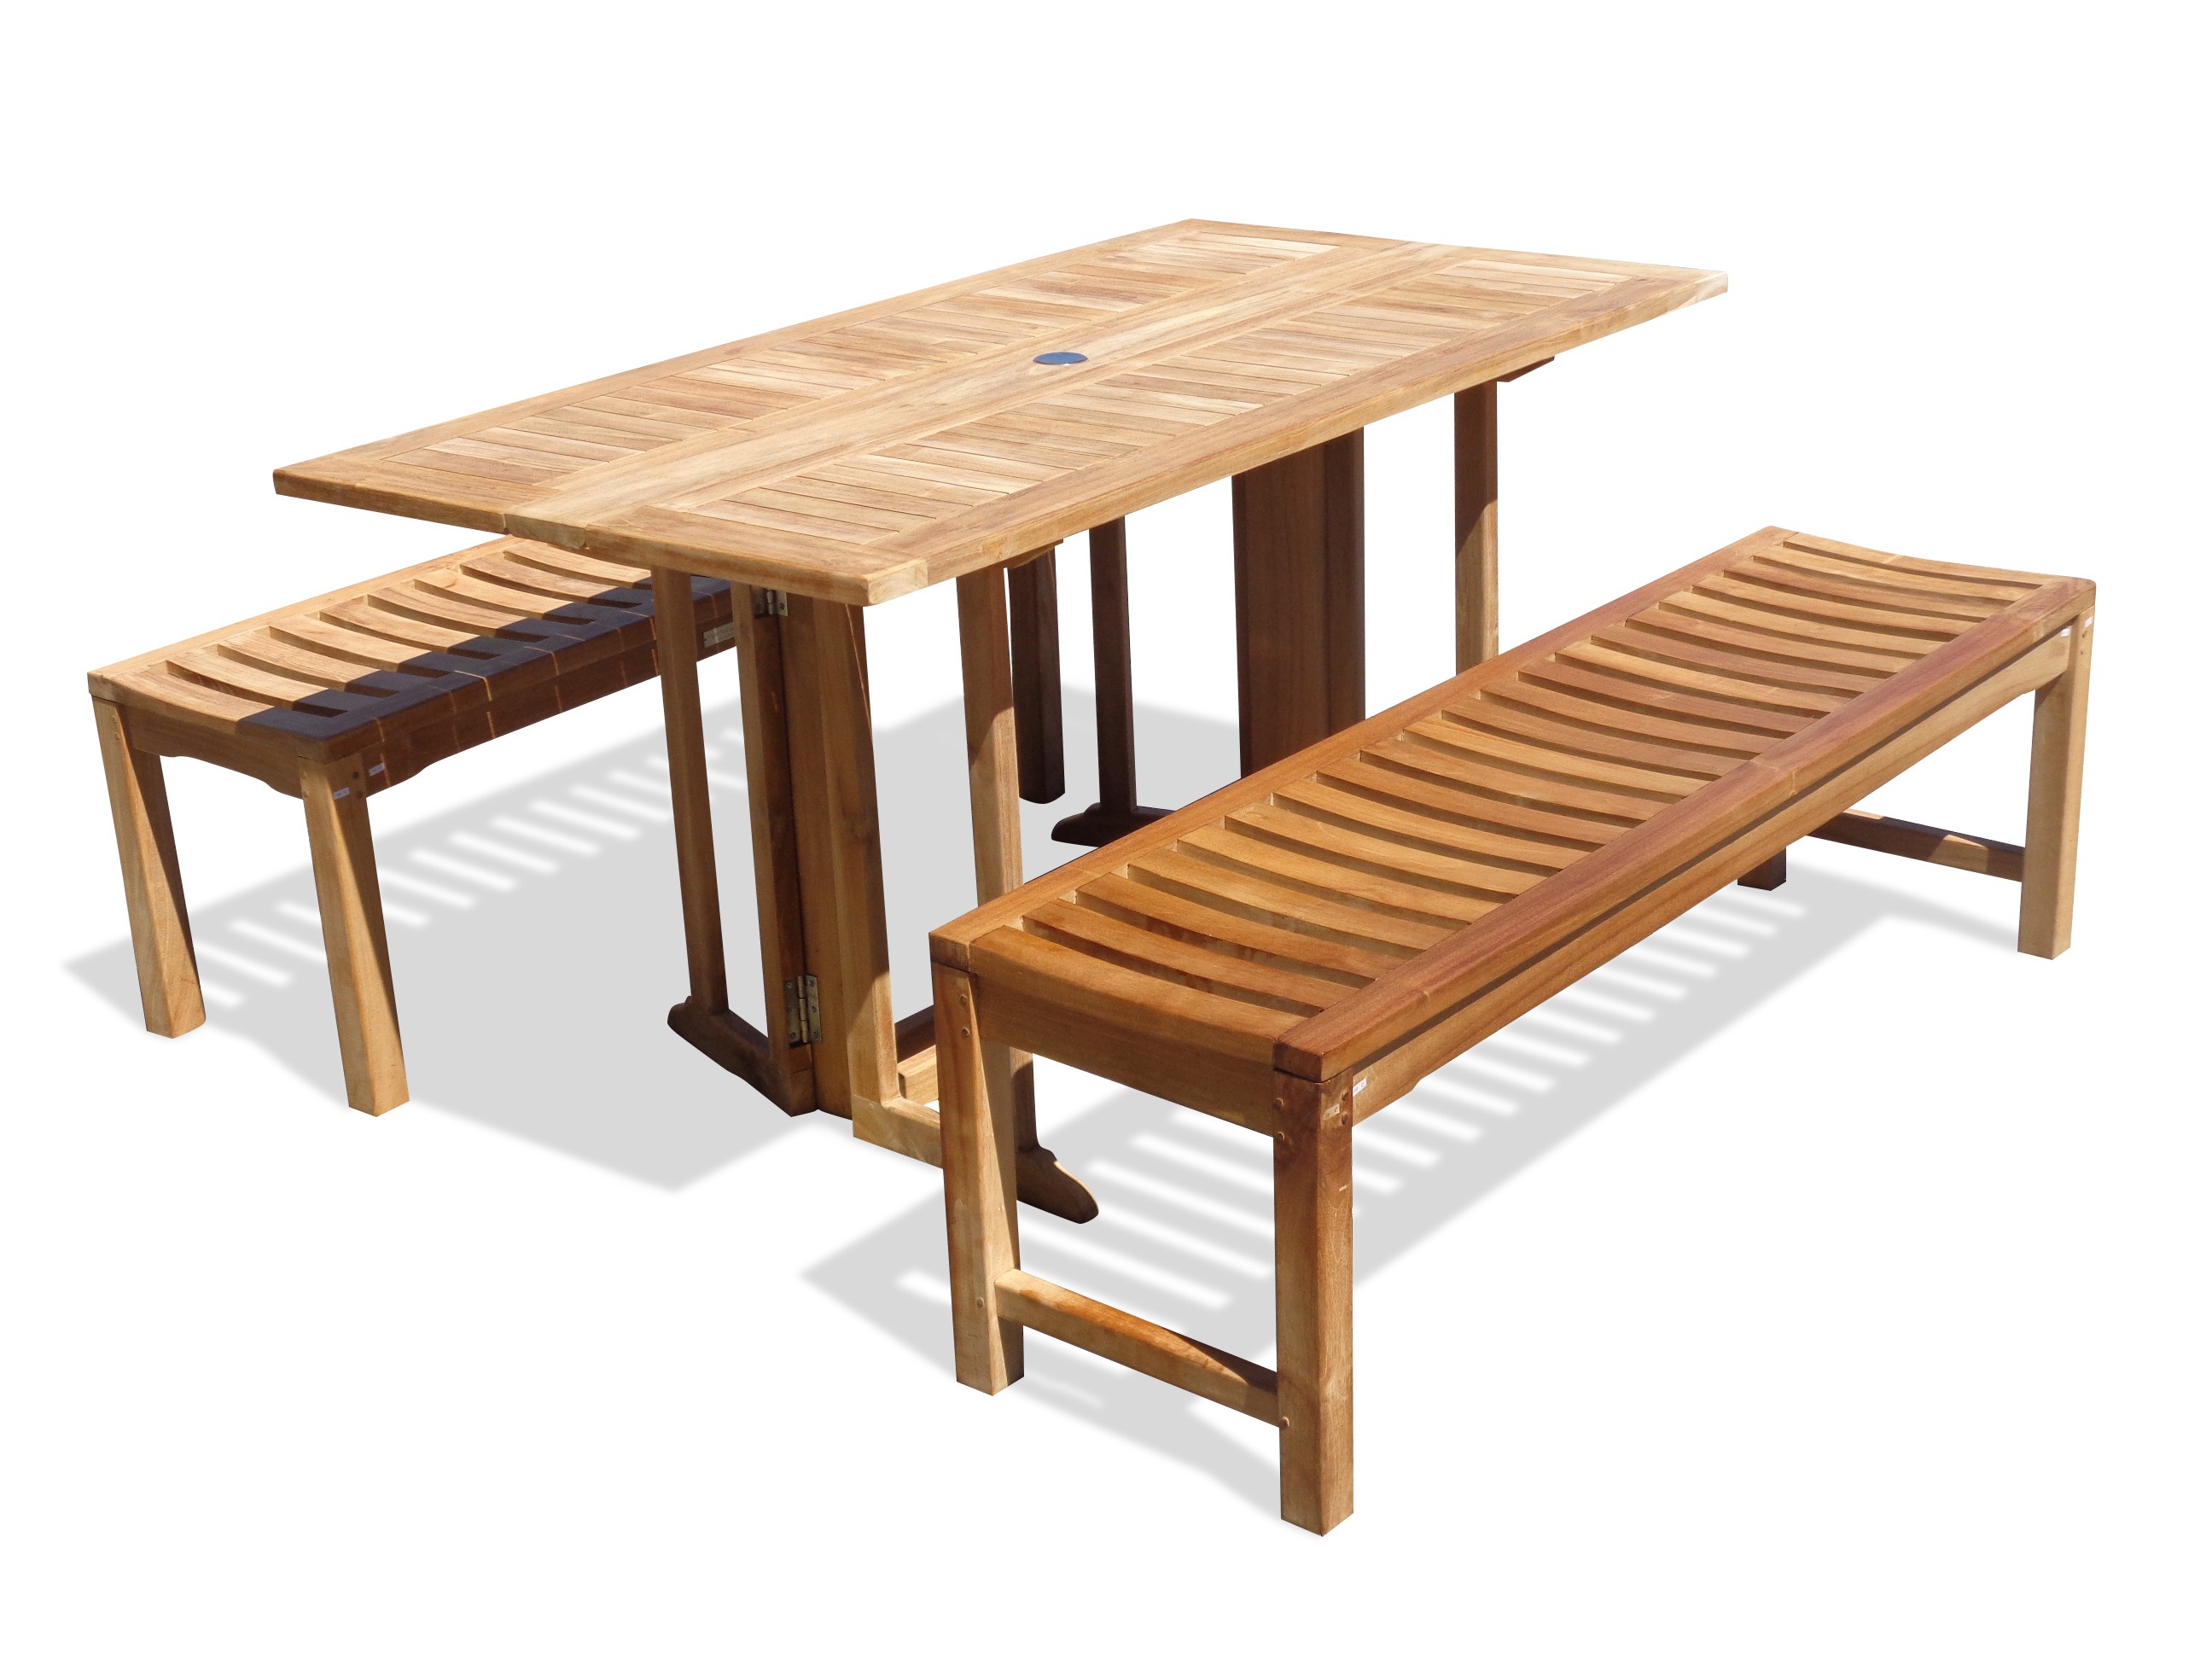 Barcelona 59" x 31" Rectangular Drop Leaf Folding Teak Table W/two 59" Backless Benches...Seats 6 Adults